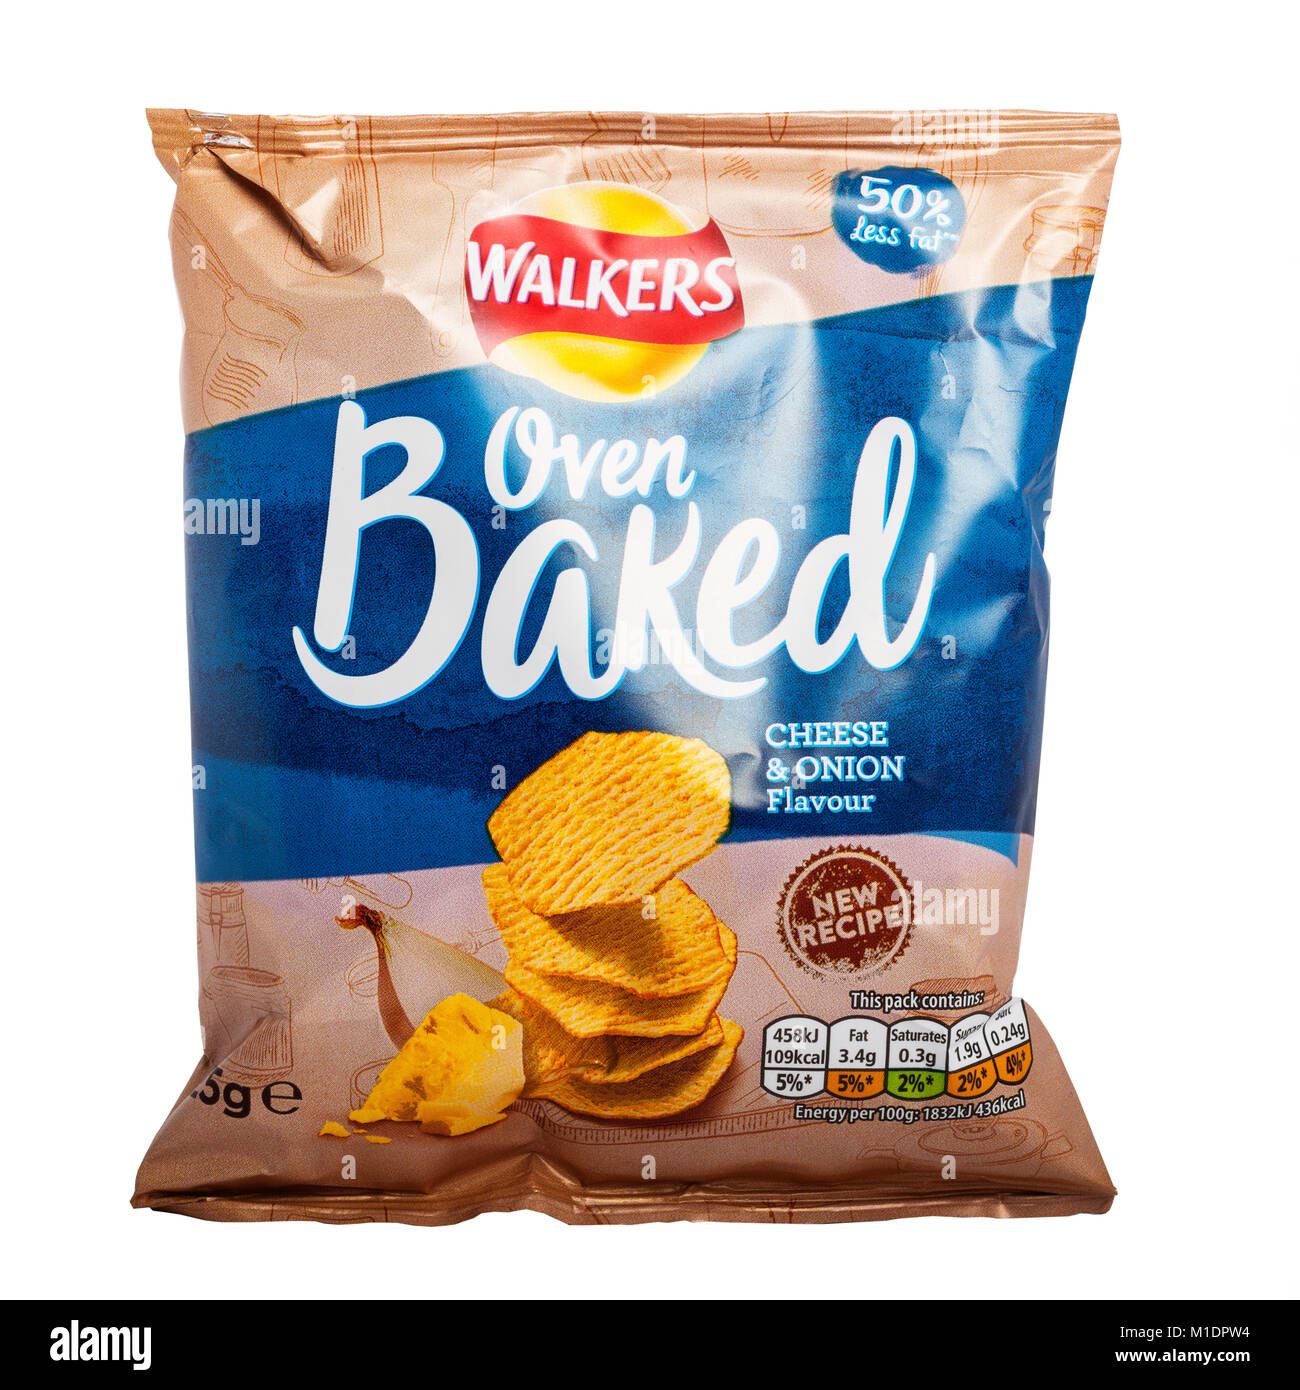 A packet of Walkers oven baked cheese & onion flavour crisps with 50% less fat on a white background Stock Photo